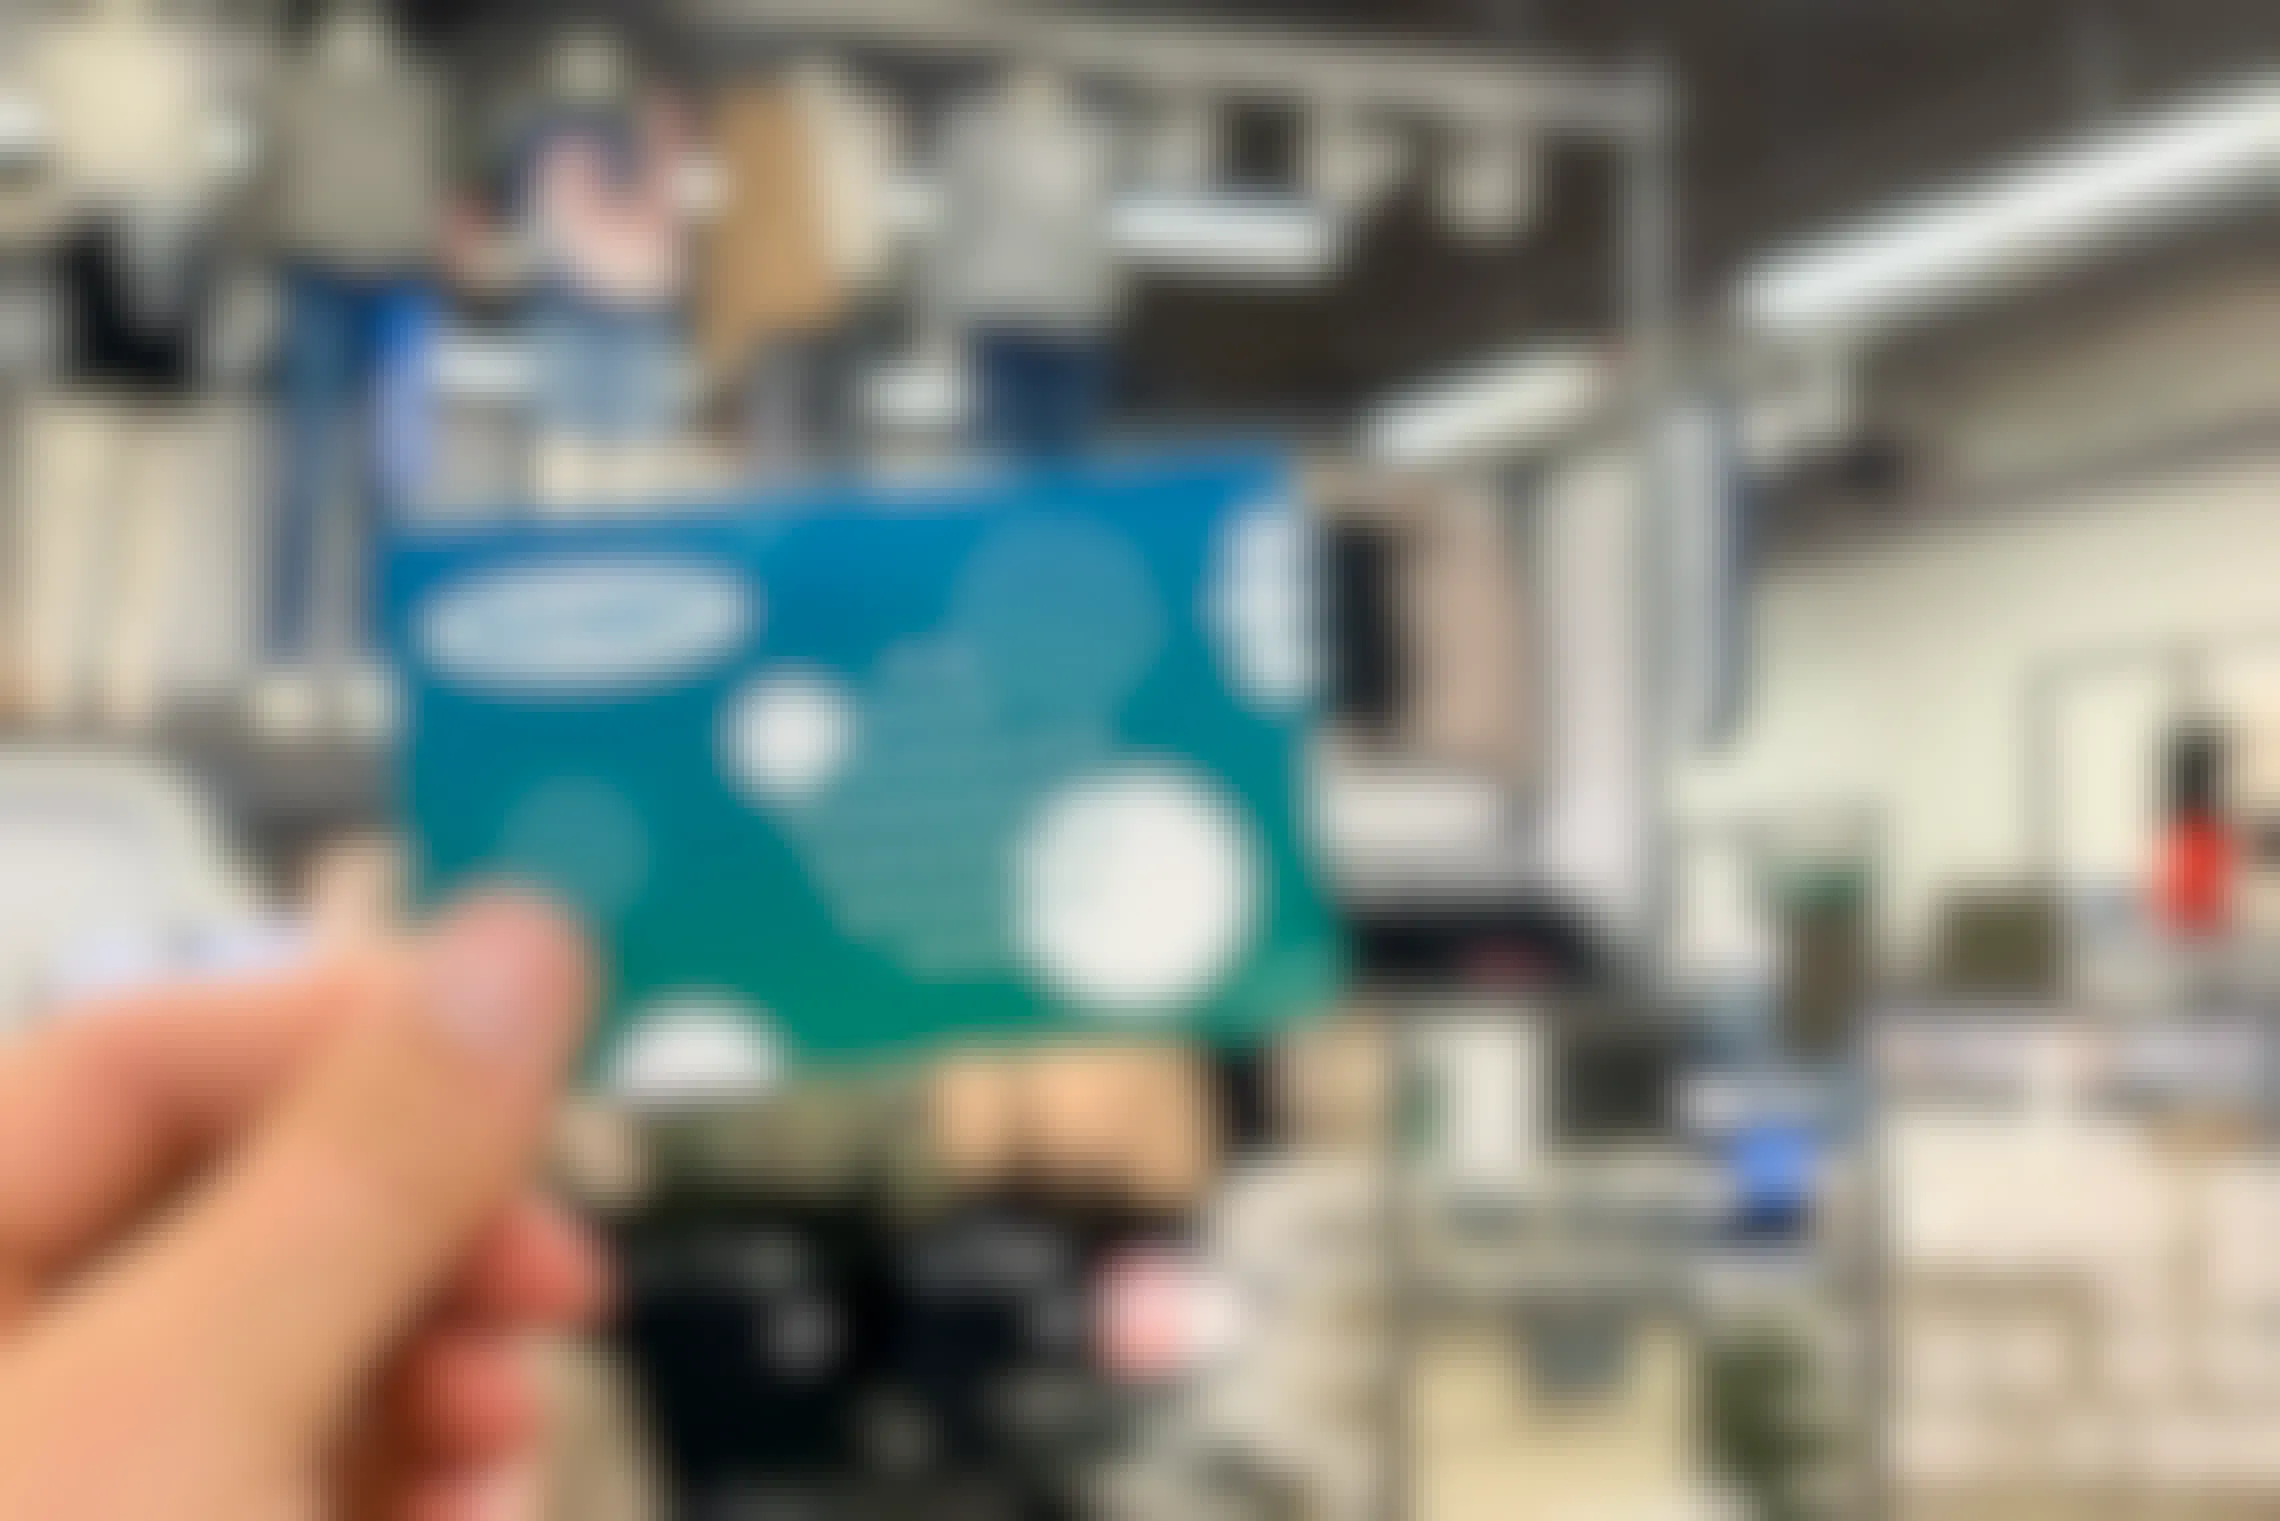 Old Navy gift card being held up in store with shirts in the background